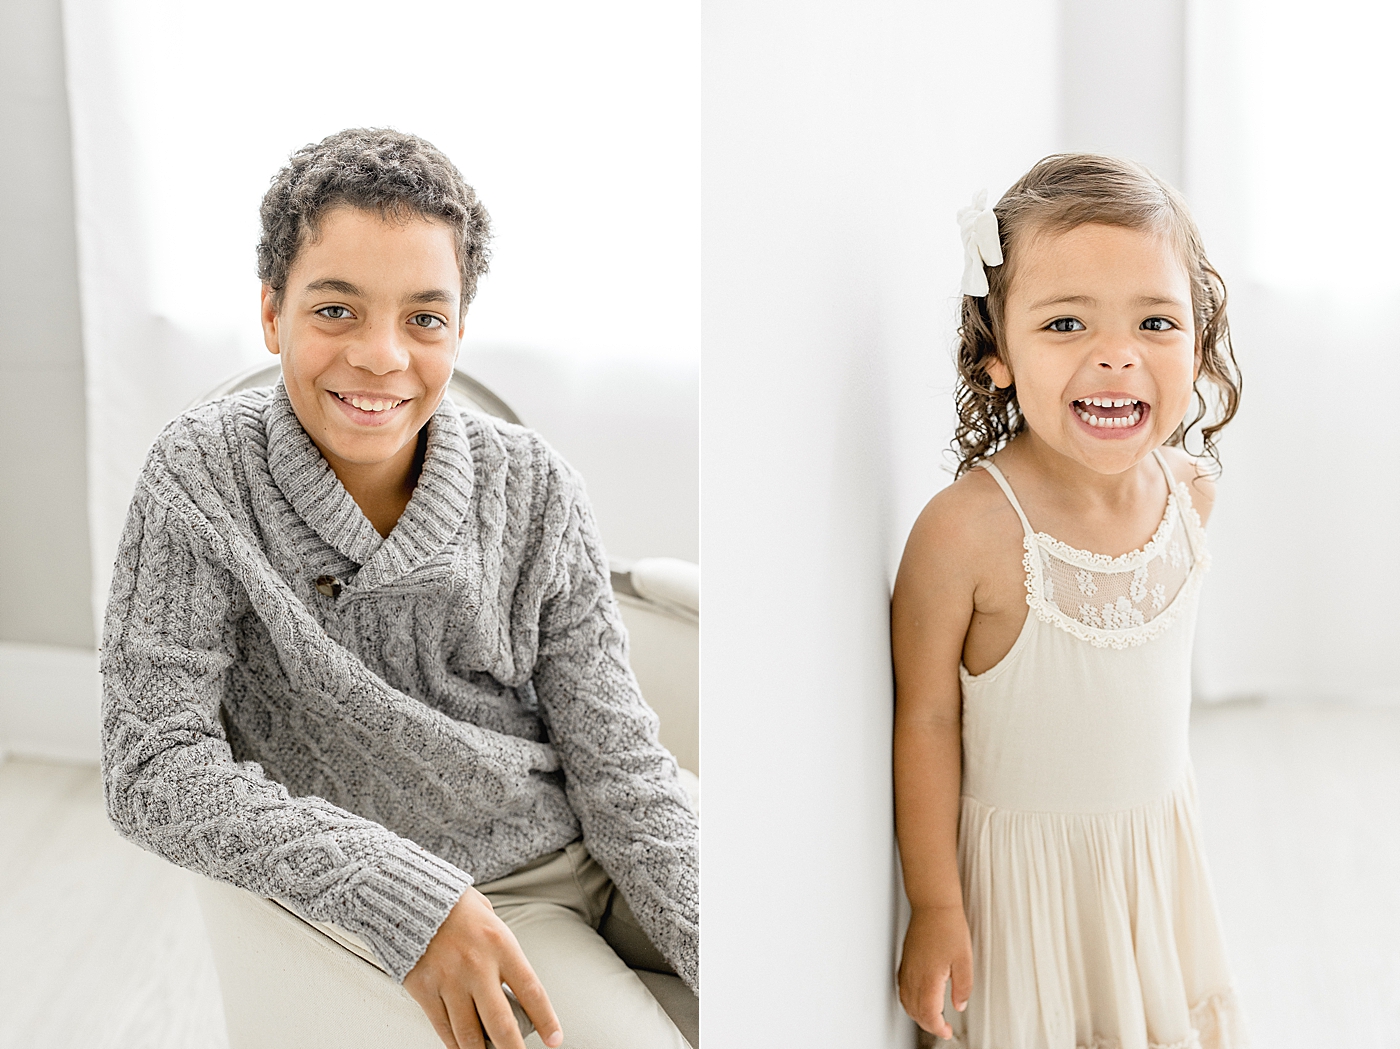 Children's portraits in studio. Photo by Brittany Elise Photography.